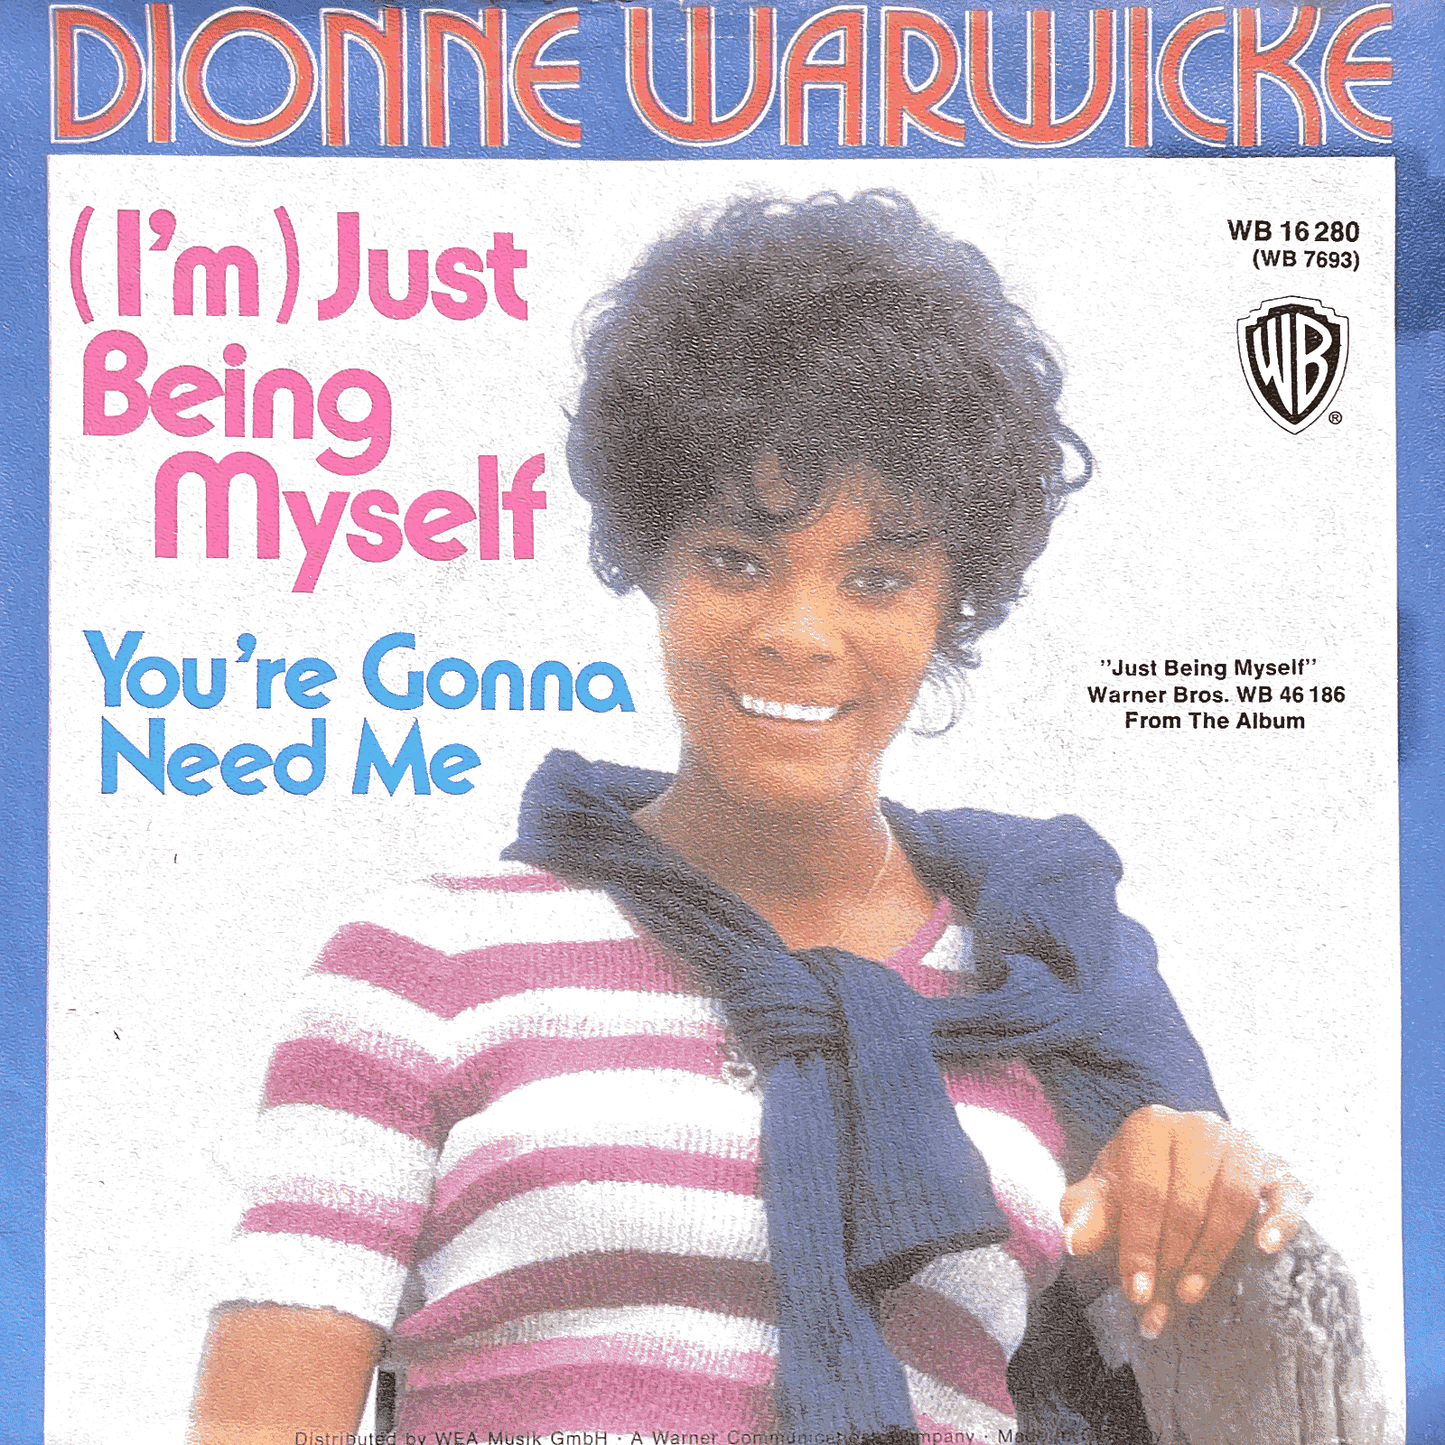 Dionne Warwicke – You're Gonna Need Me / (I'm) Just Being Myself ( Warner Bros. Records Germany ) 45